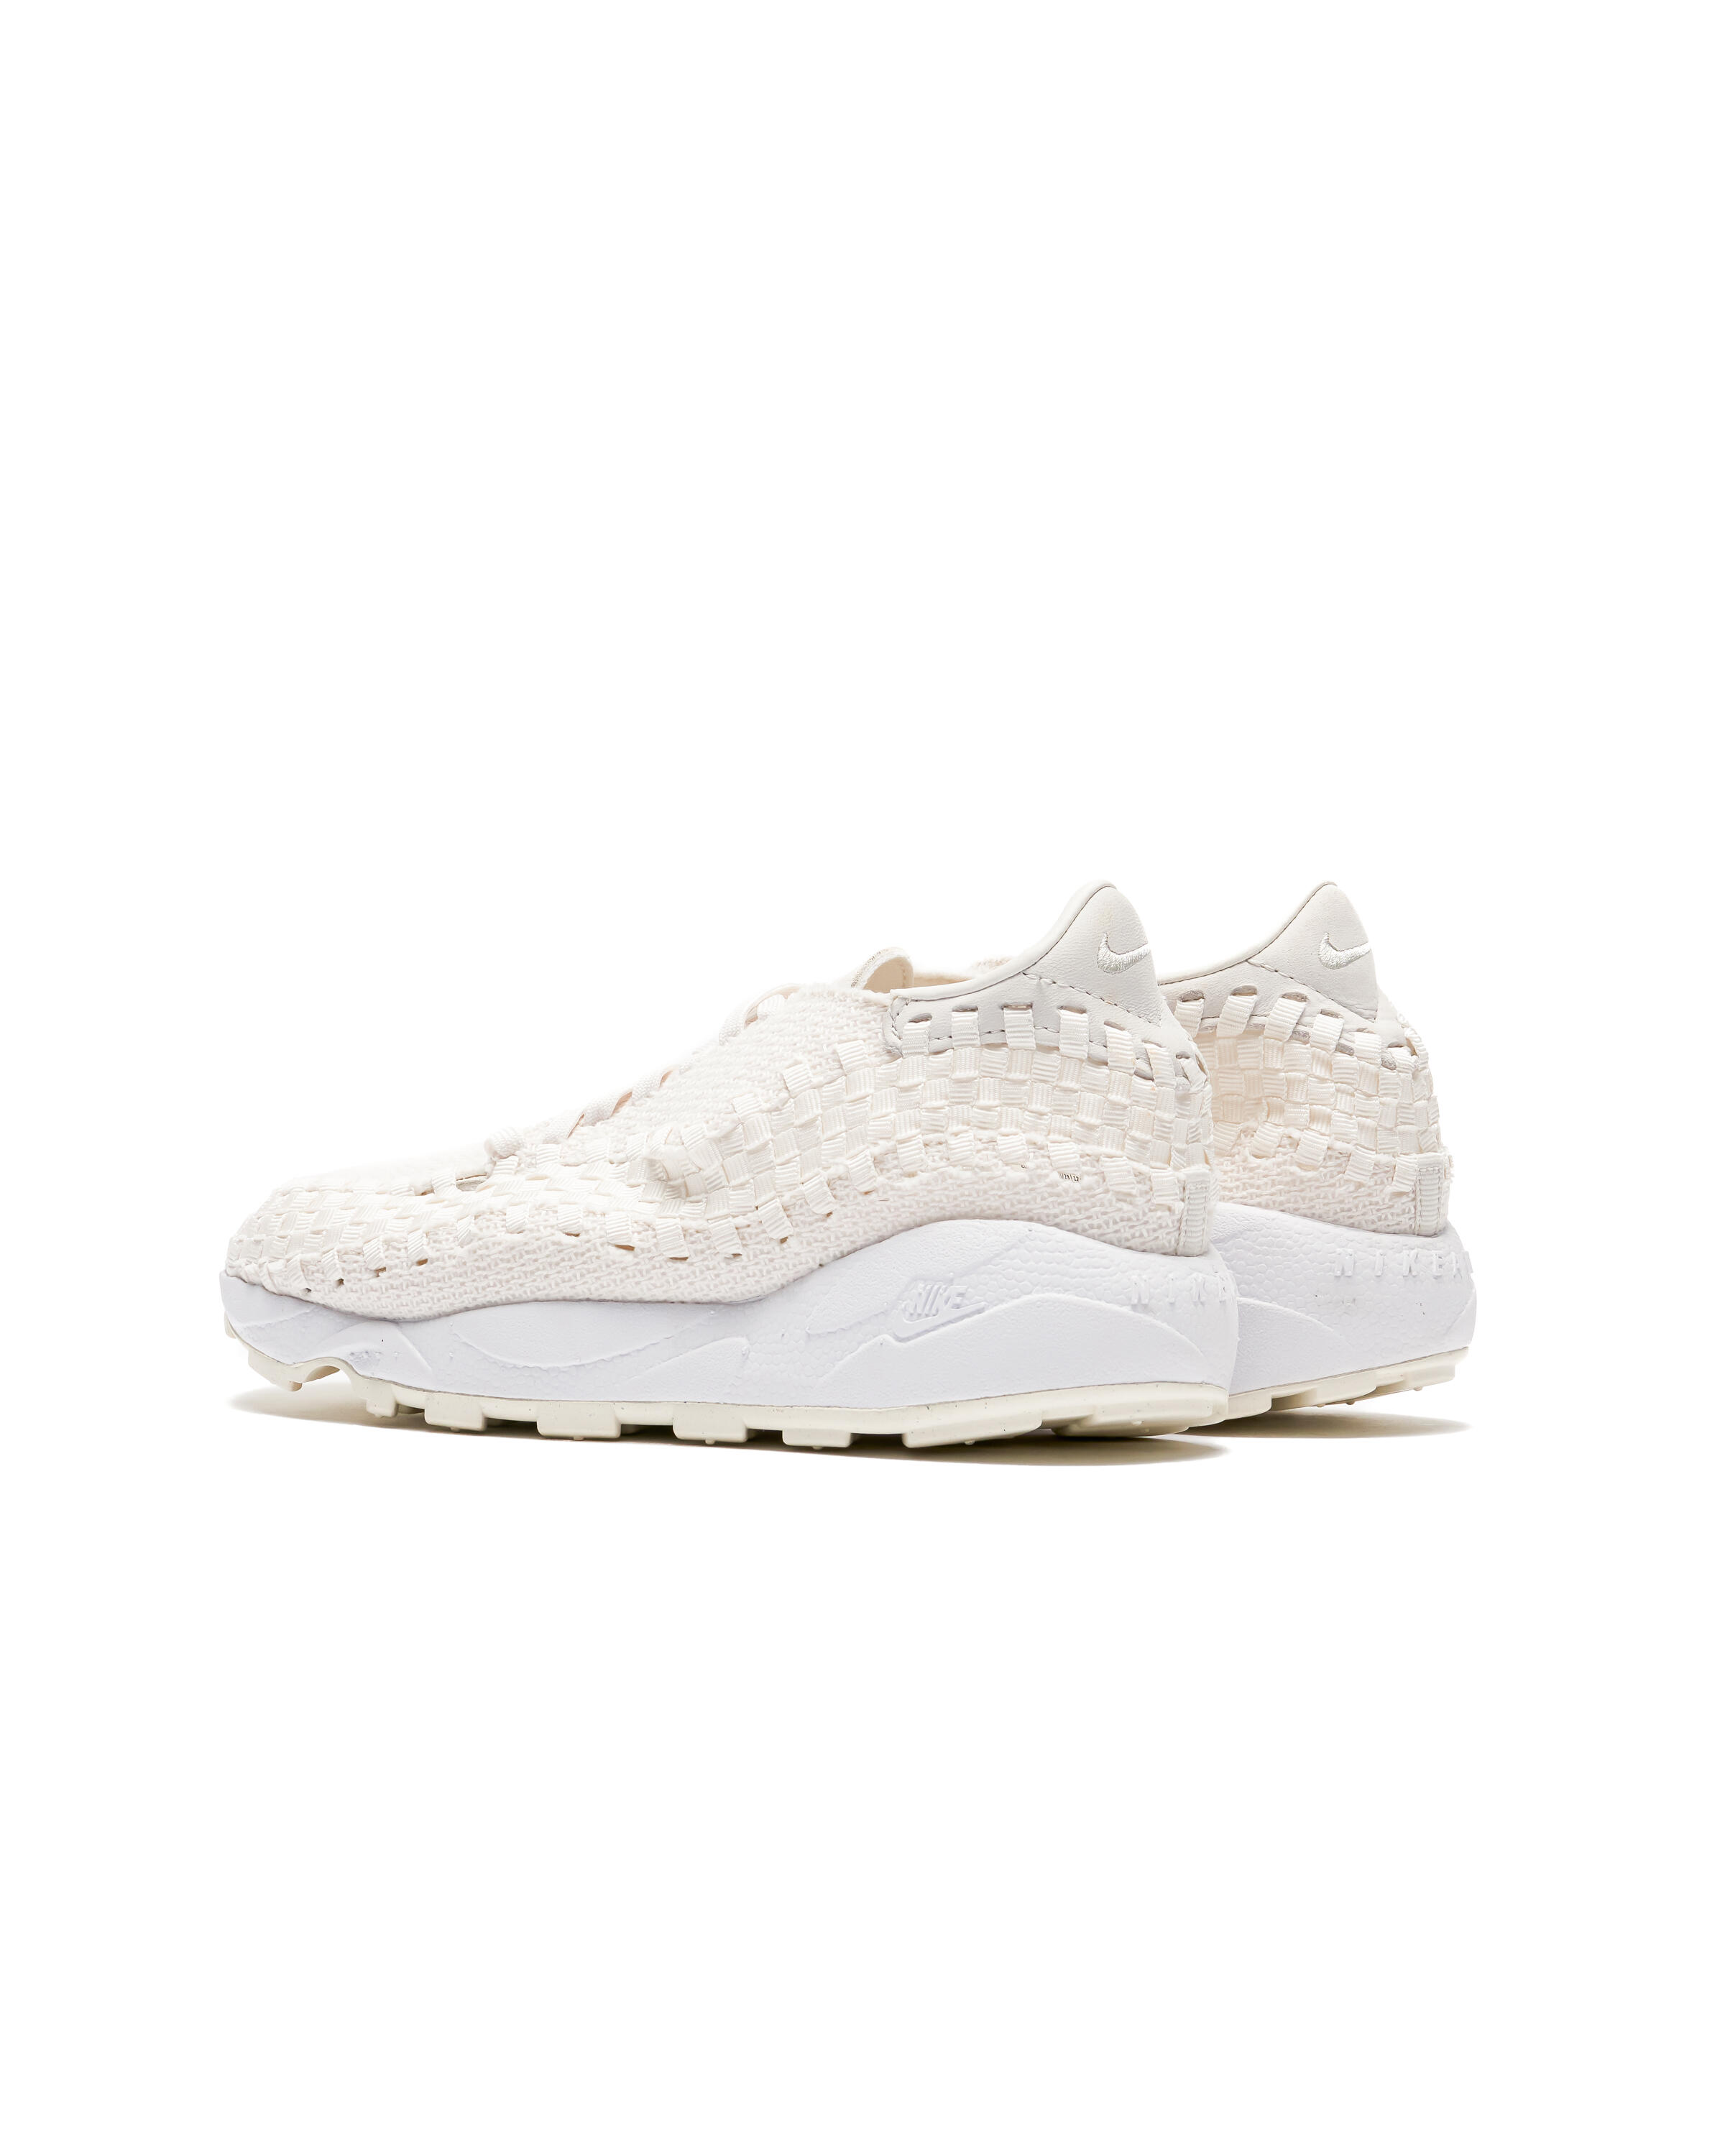 Nike WMNS AIR FOOTSCAPE WOVEN